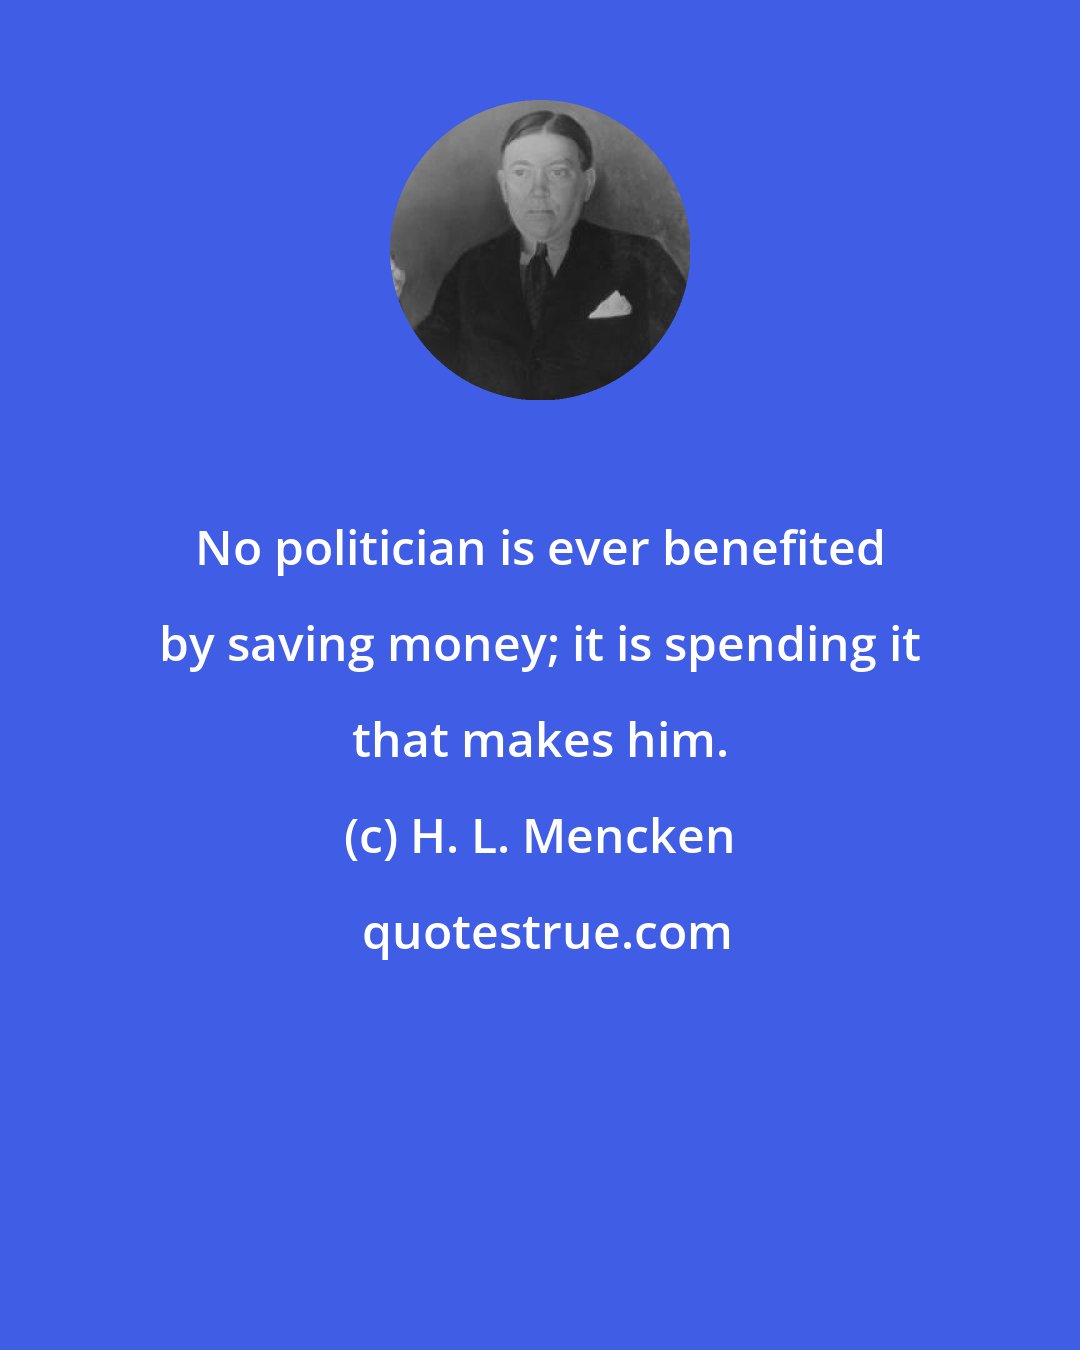 H. L. Mencken: No politician is ever benefited by saving money; it is spending it that makes him.